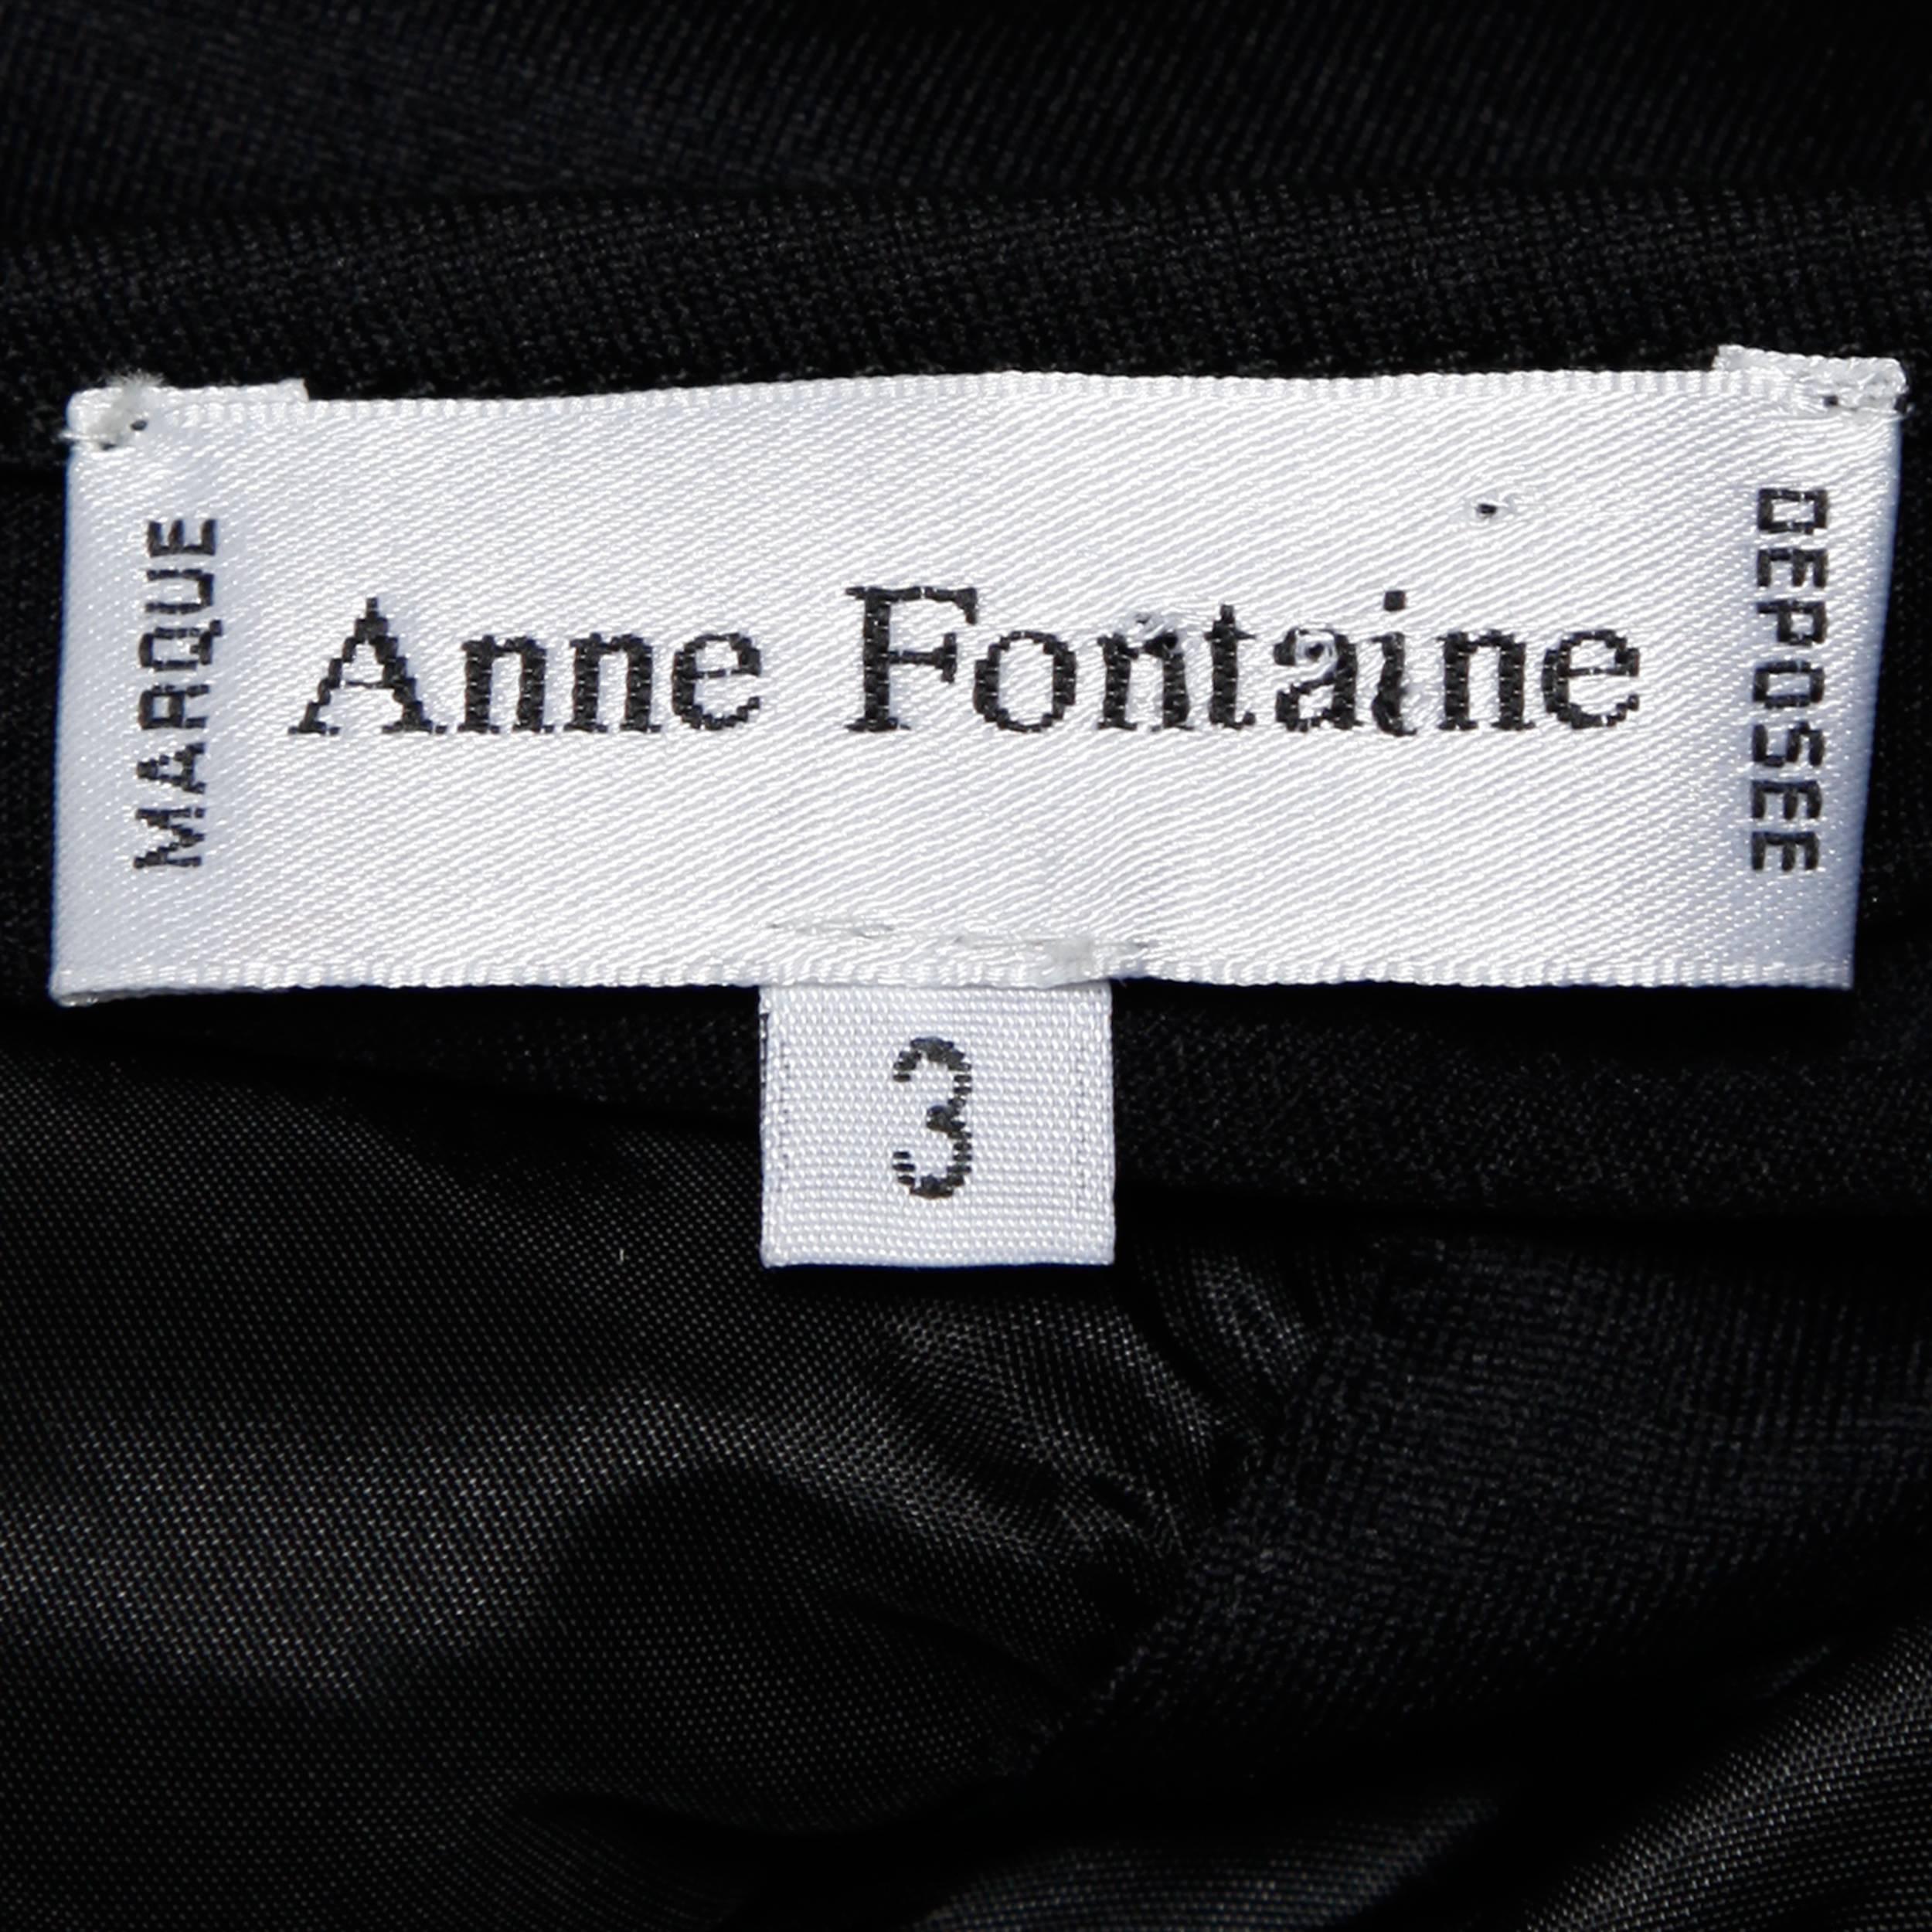 Elegant contemporary black jersey knit top with ruching. By French designer Anne Fontaine.

Details:

Unlined
No Closure/ Fabric Contains Stretch
Marked Size: 3
Estimated Size: Medium
Color: Black
Fabric: 100% Polyester/ 8% Elastic/ 92%